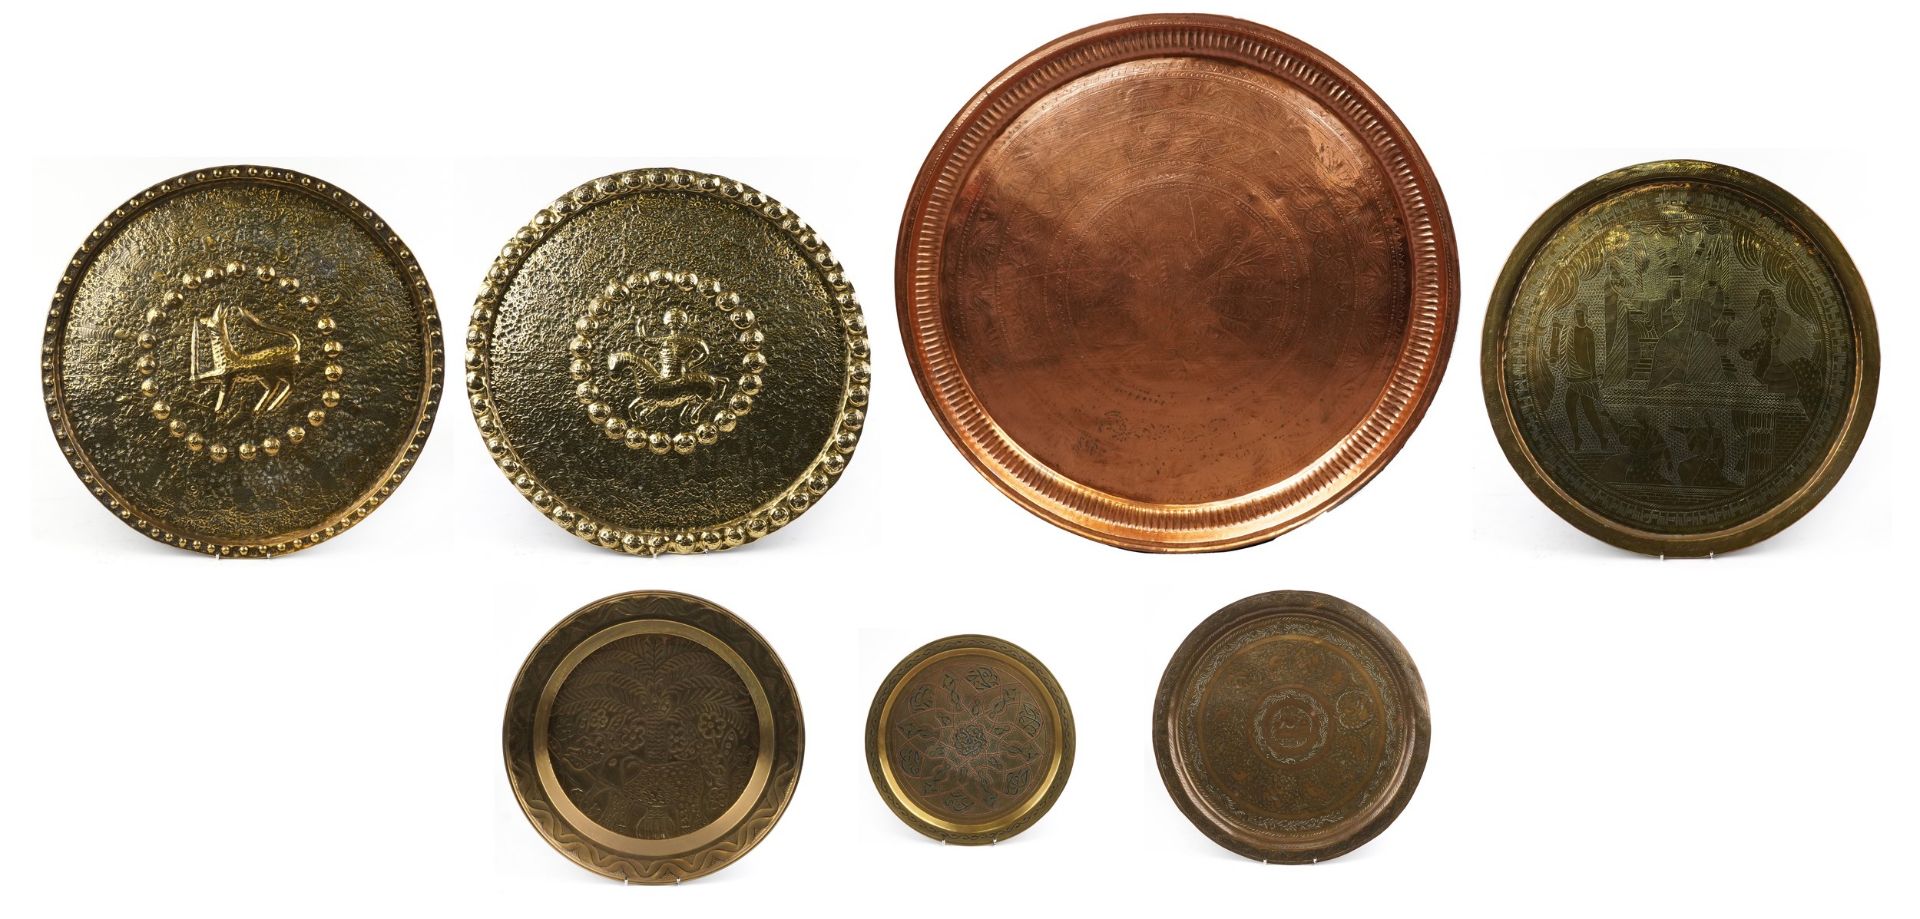 Seven Islamic and Middle Eastern trays including a Cairoware example with silver and copper inlay